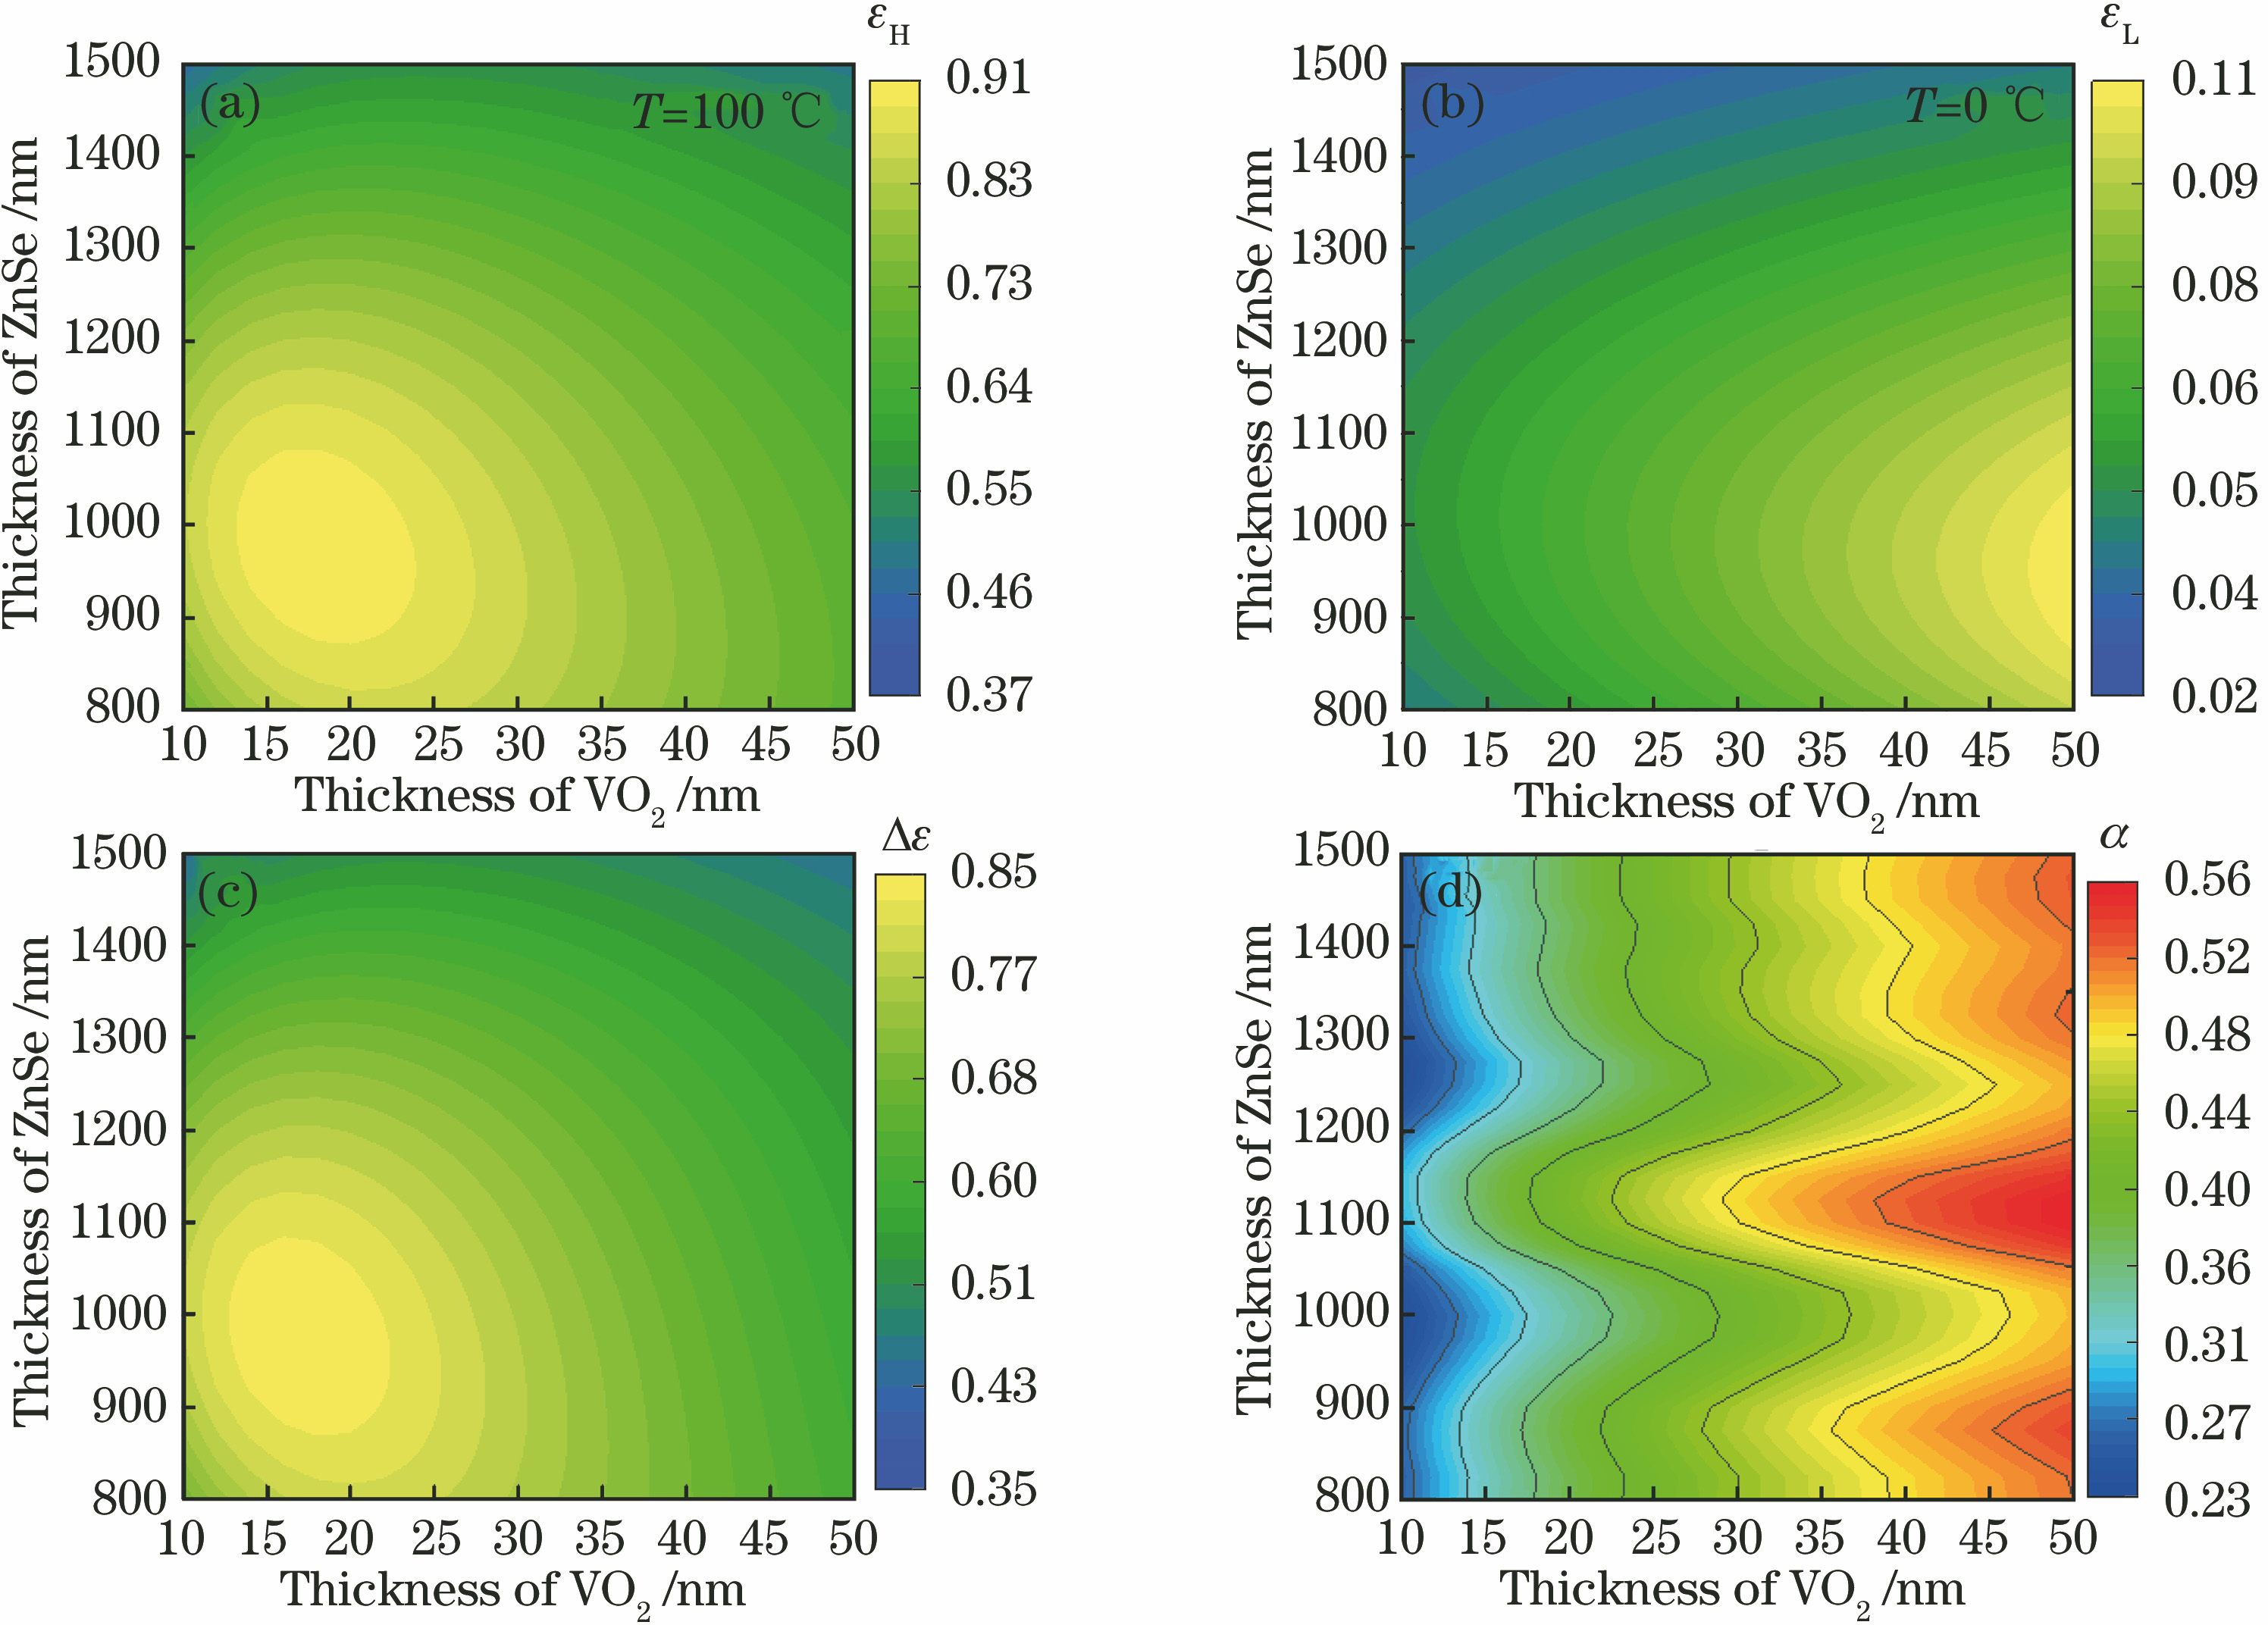 Influence of cavity thickness on main physical parameters. (a) εH; (b) εL; (c) Δε; (d) α